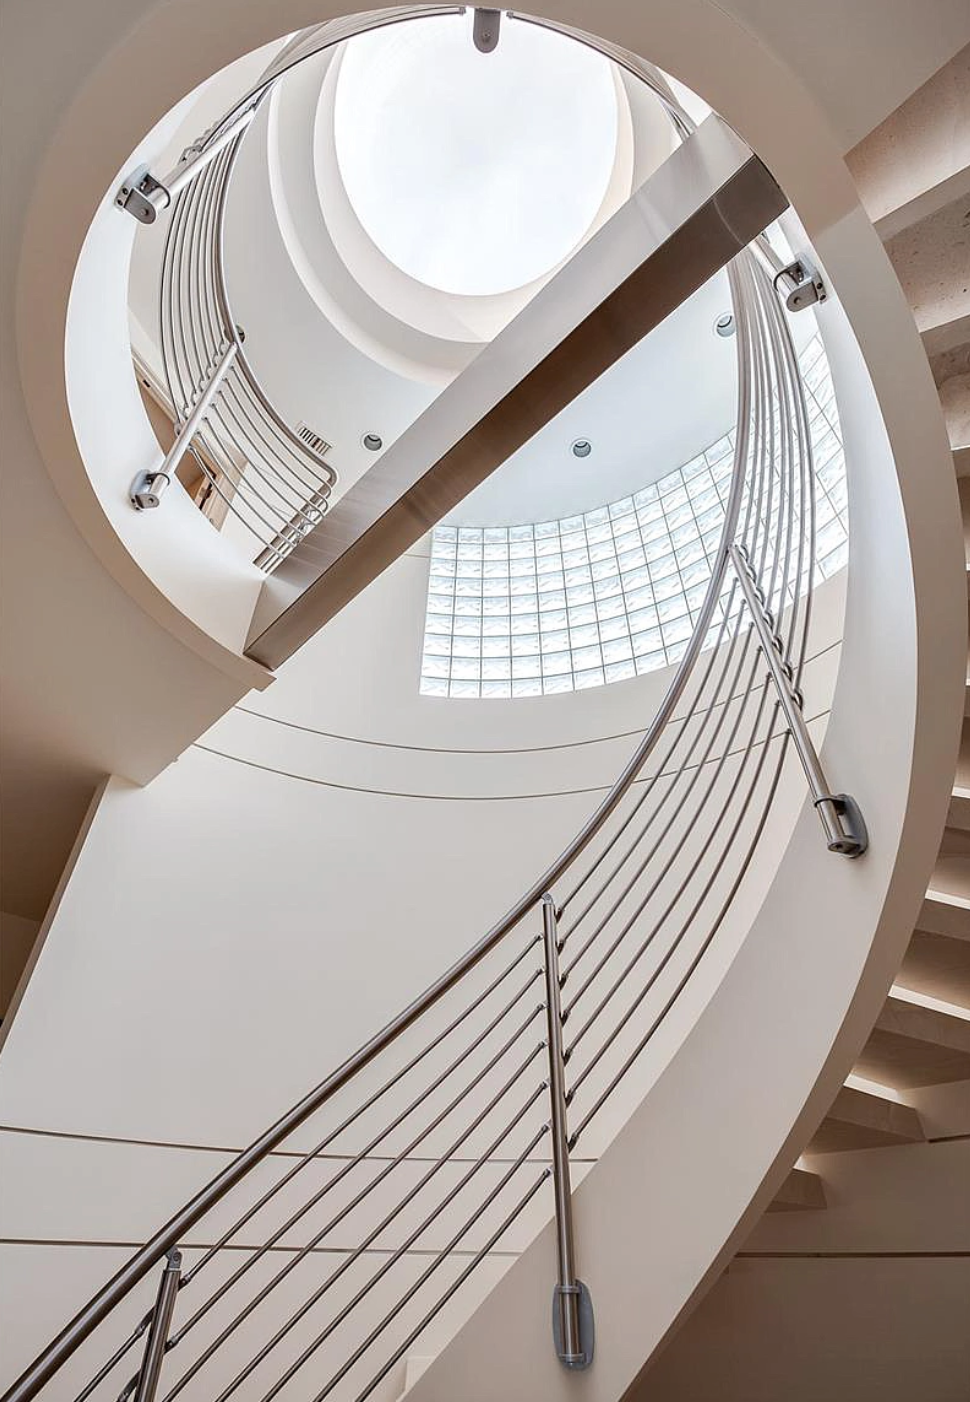 Spiral staircase and skylight